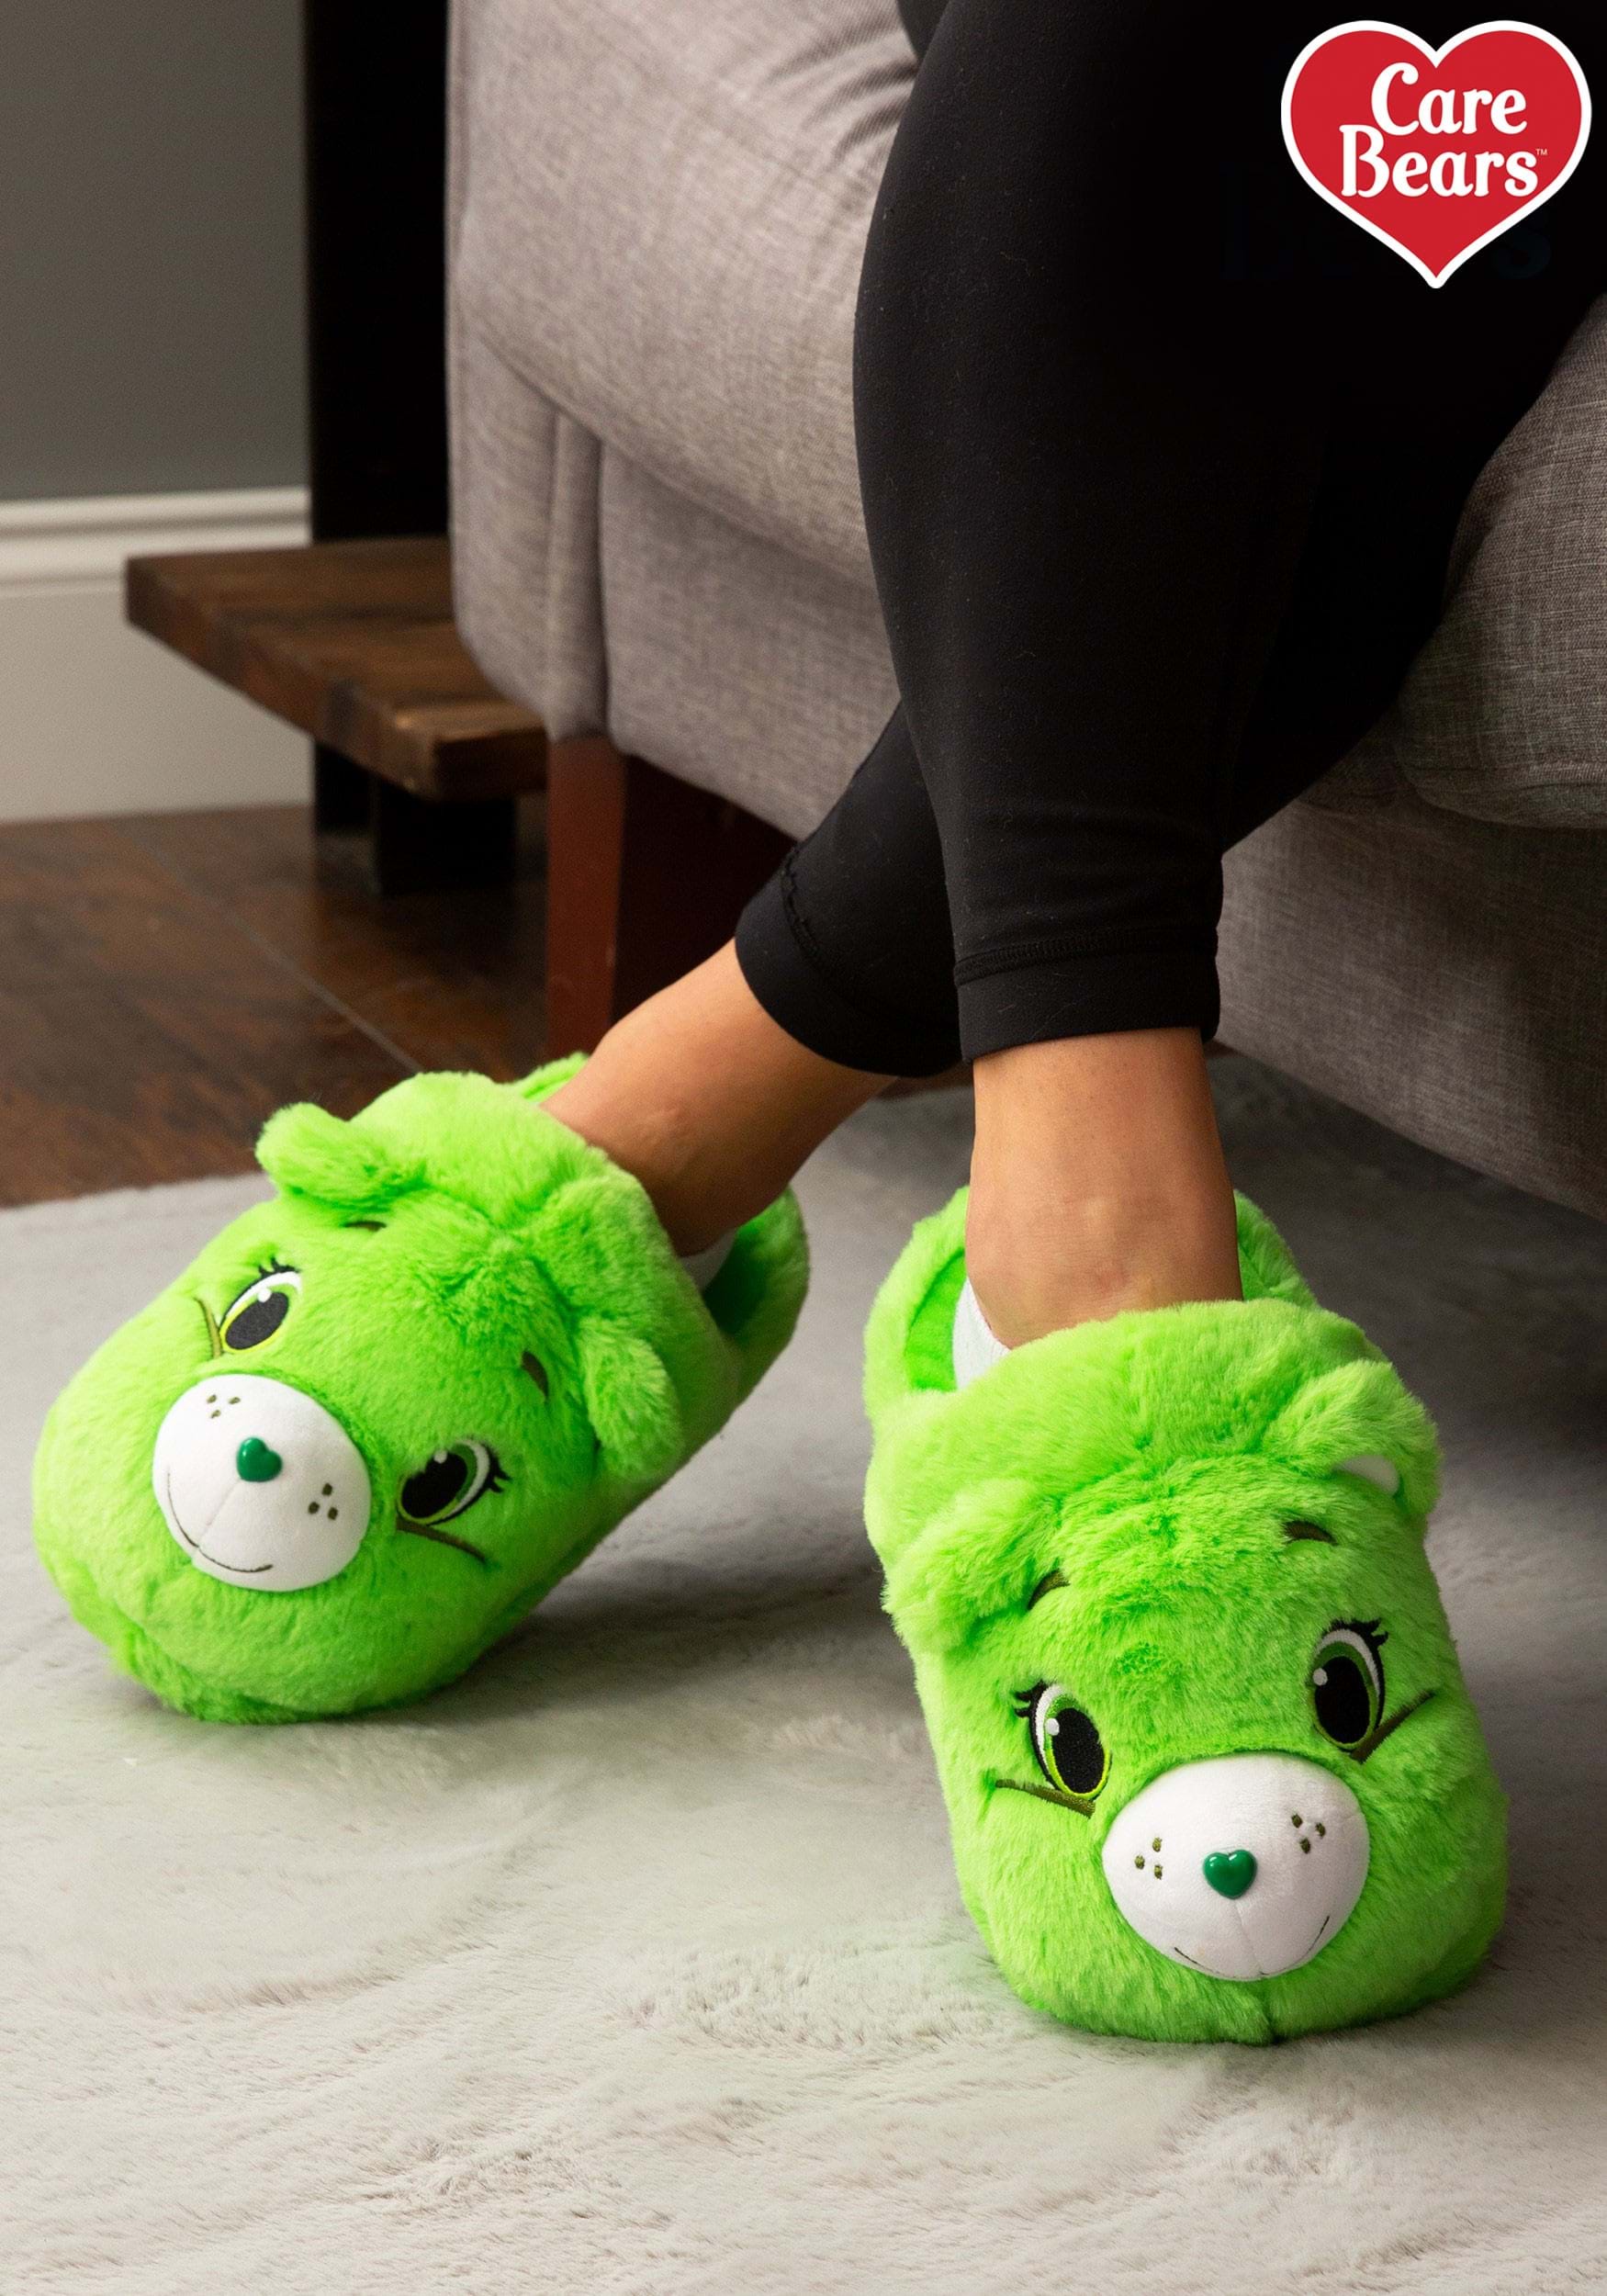 care bears slippers